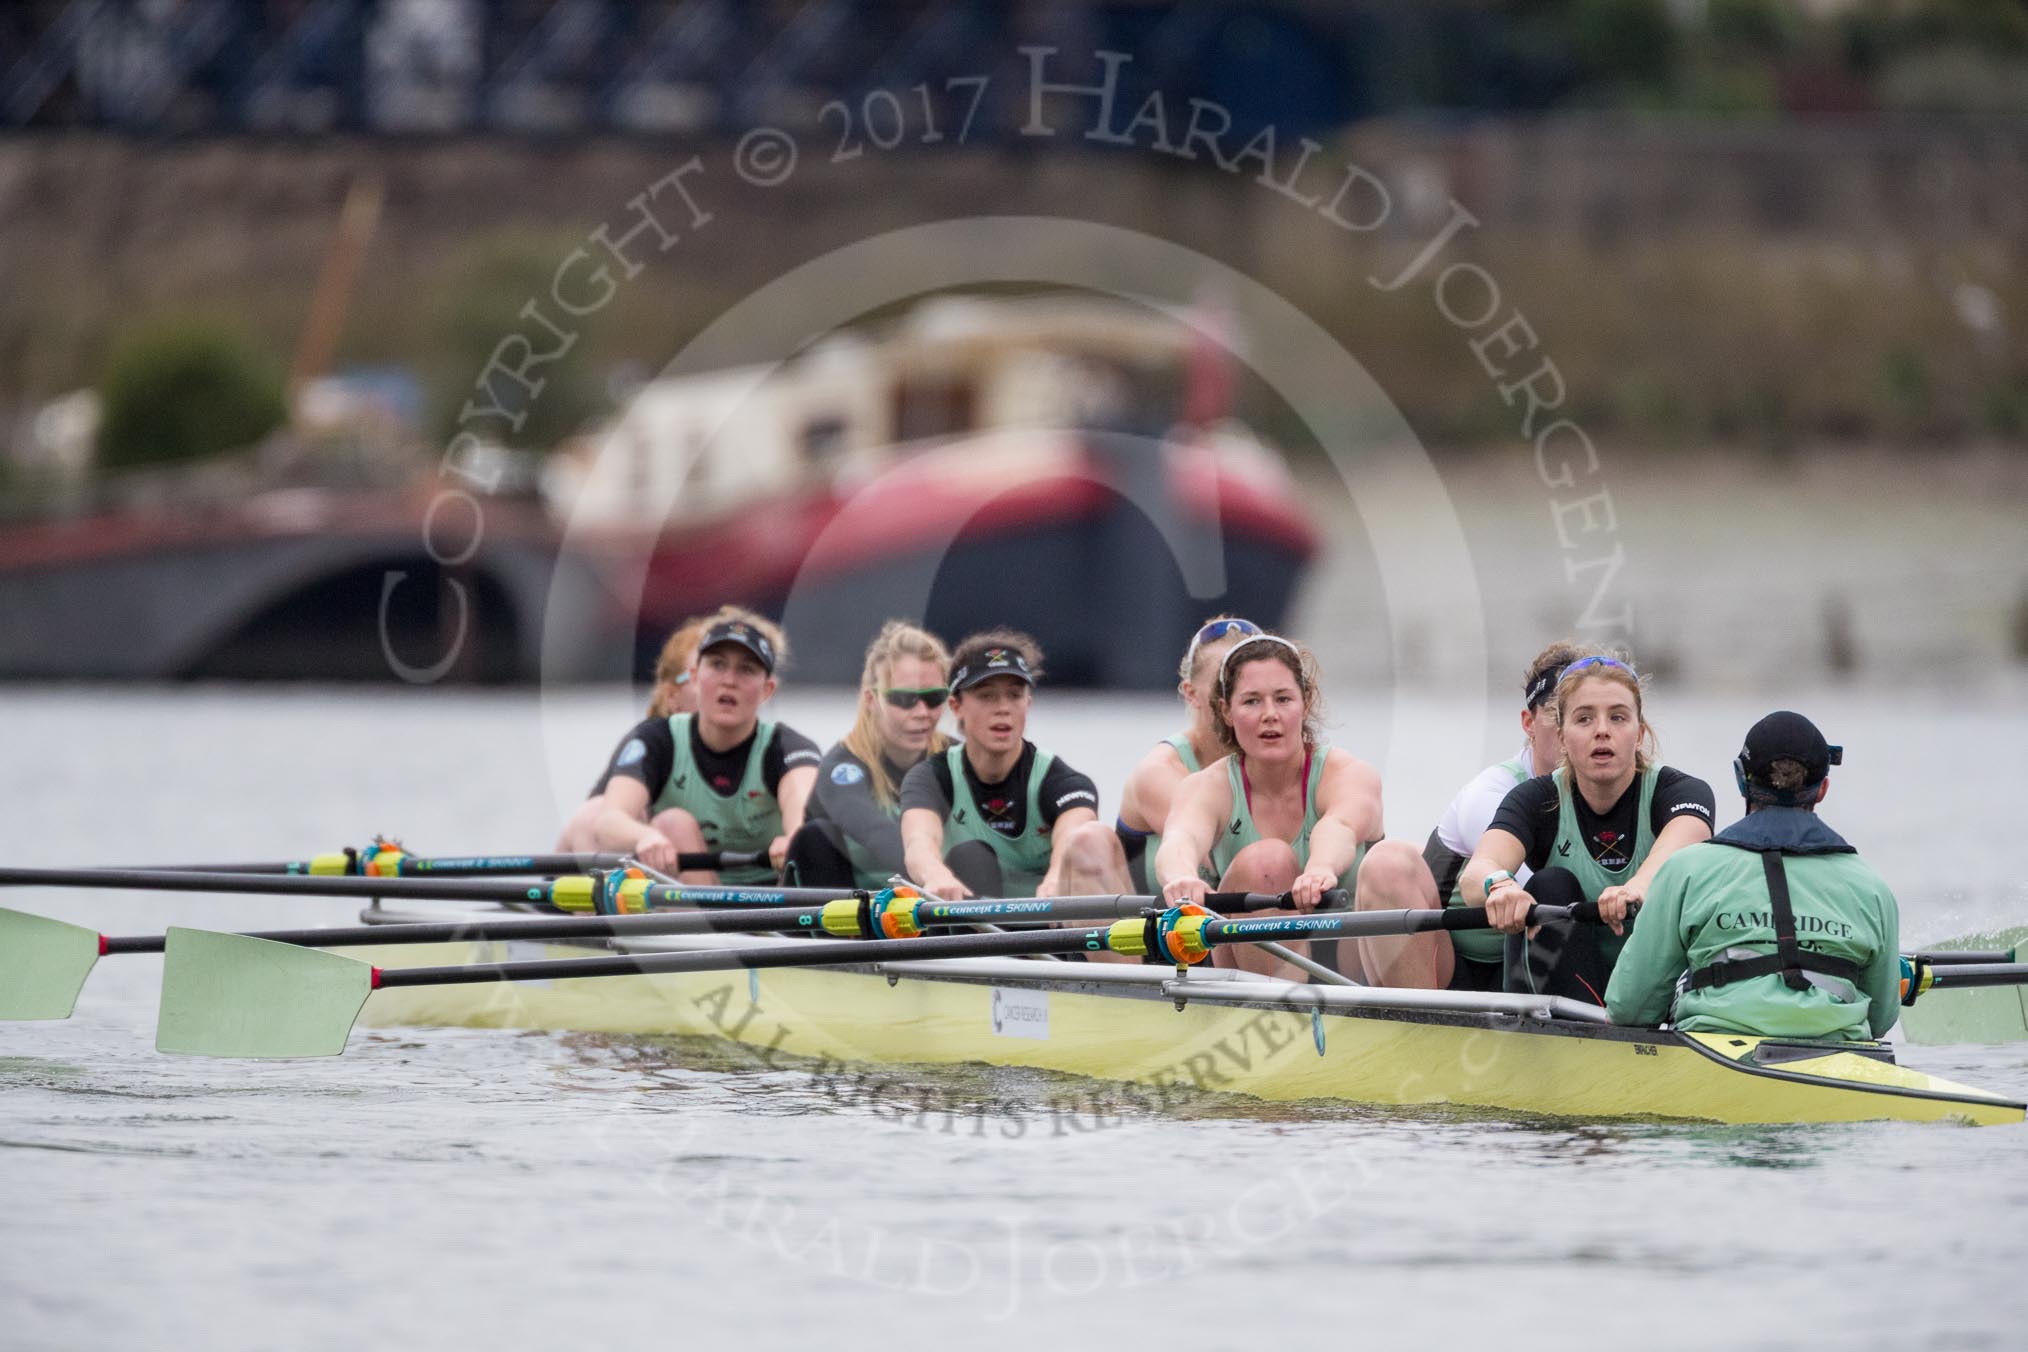 The Boat Race season 2017 - Women's Boat Race Fixture CUWBC vs Univerity of London: The CUWBC eight leading by more than one length on the approach to Hammersmith Bridge - cox - Matthew Holland, stroke - Alice White, 7 - Myriam Goudet, 6 - Melissa Wilson, 5 - Holy Hill, 4 - Imogen Grant, 3 - Ashton Brown, 2 - Kirsten Van Fosen, bow - Claire Lambe.
River Thames between Putney Bridge and Mortlake,
London SW15,

United Kingdom,
on 19 February 2017 at 16:09, image #99